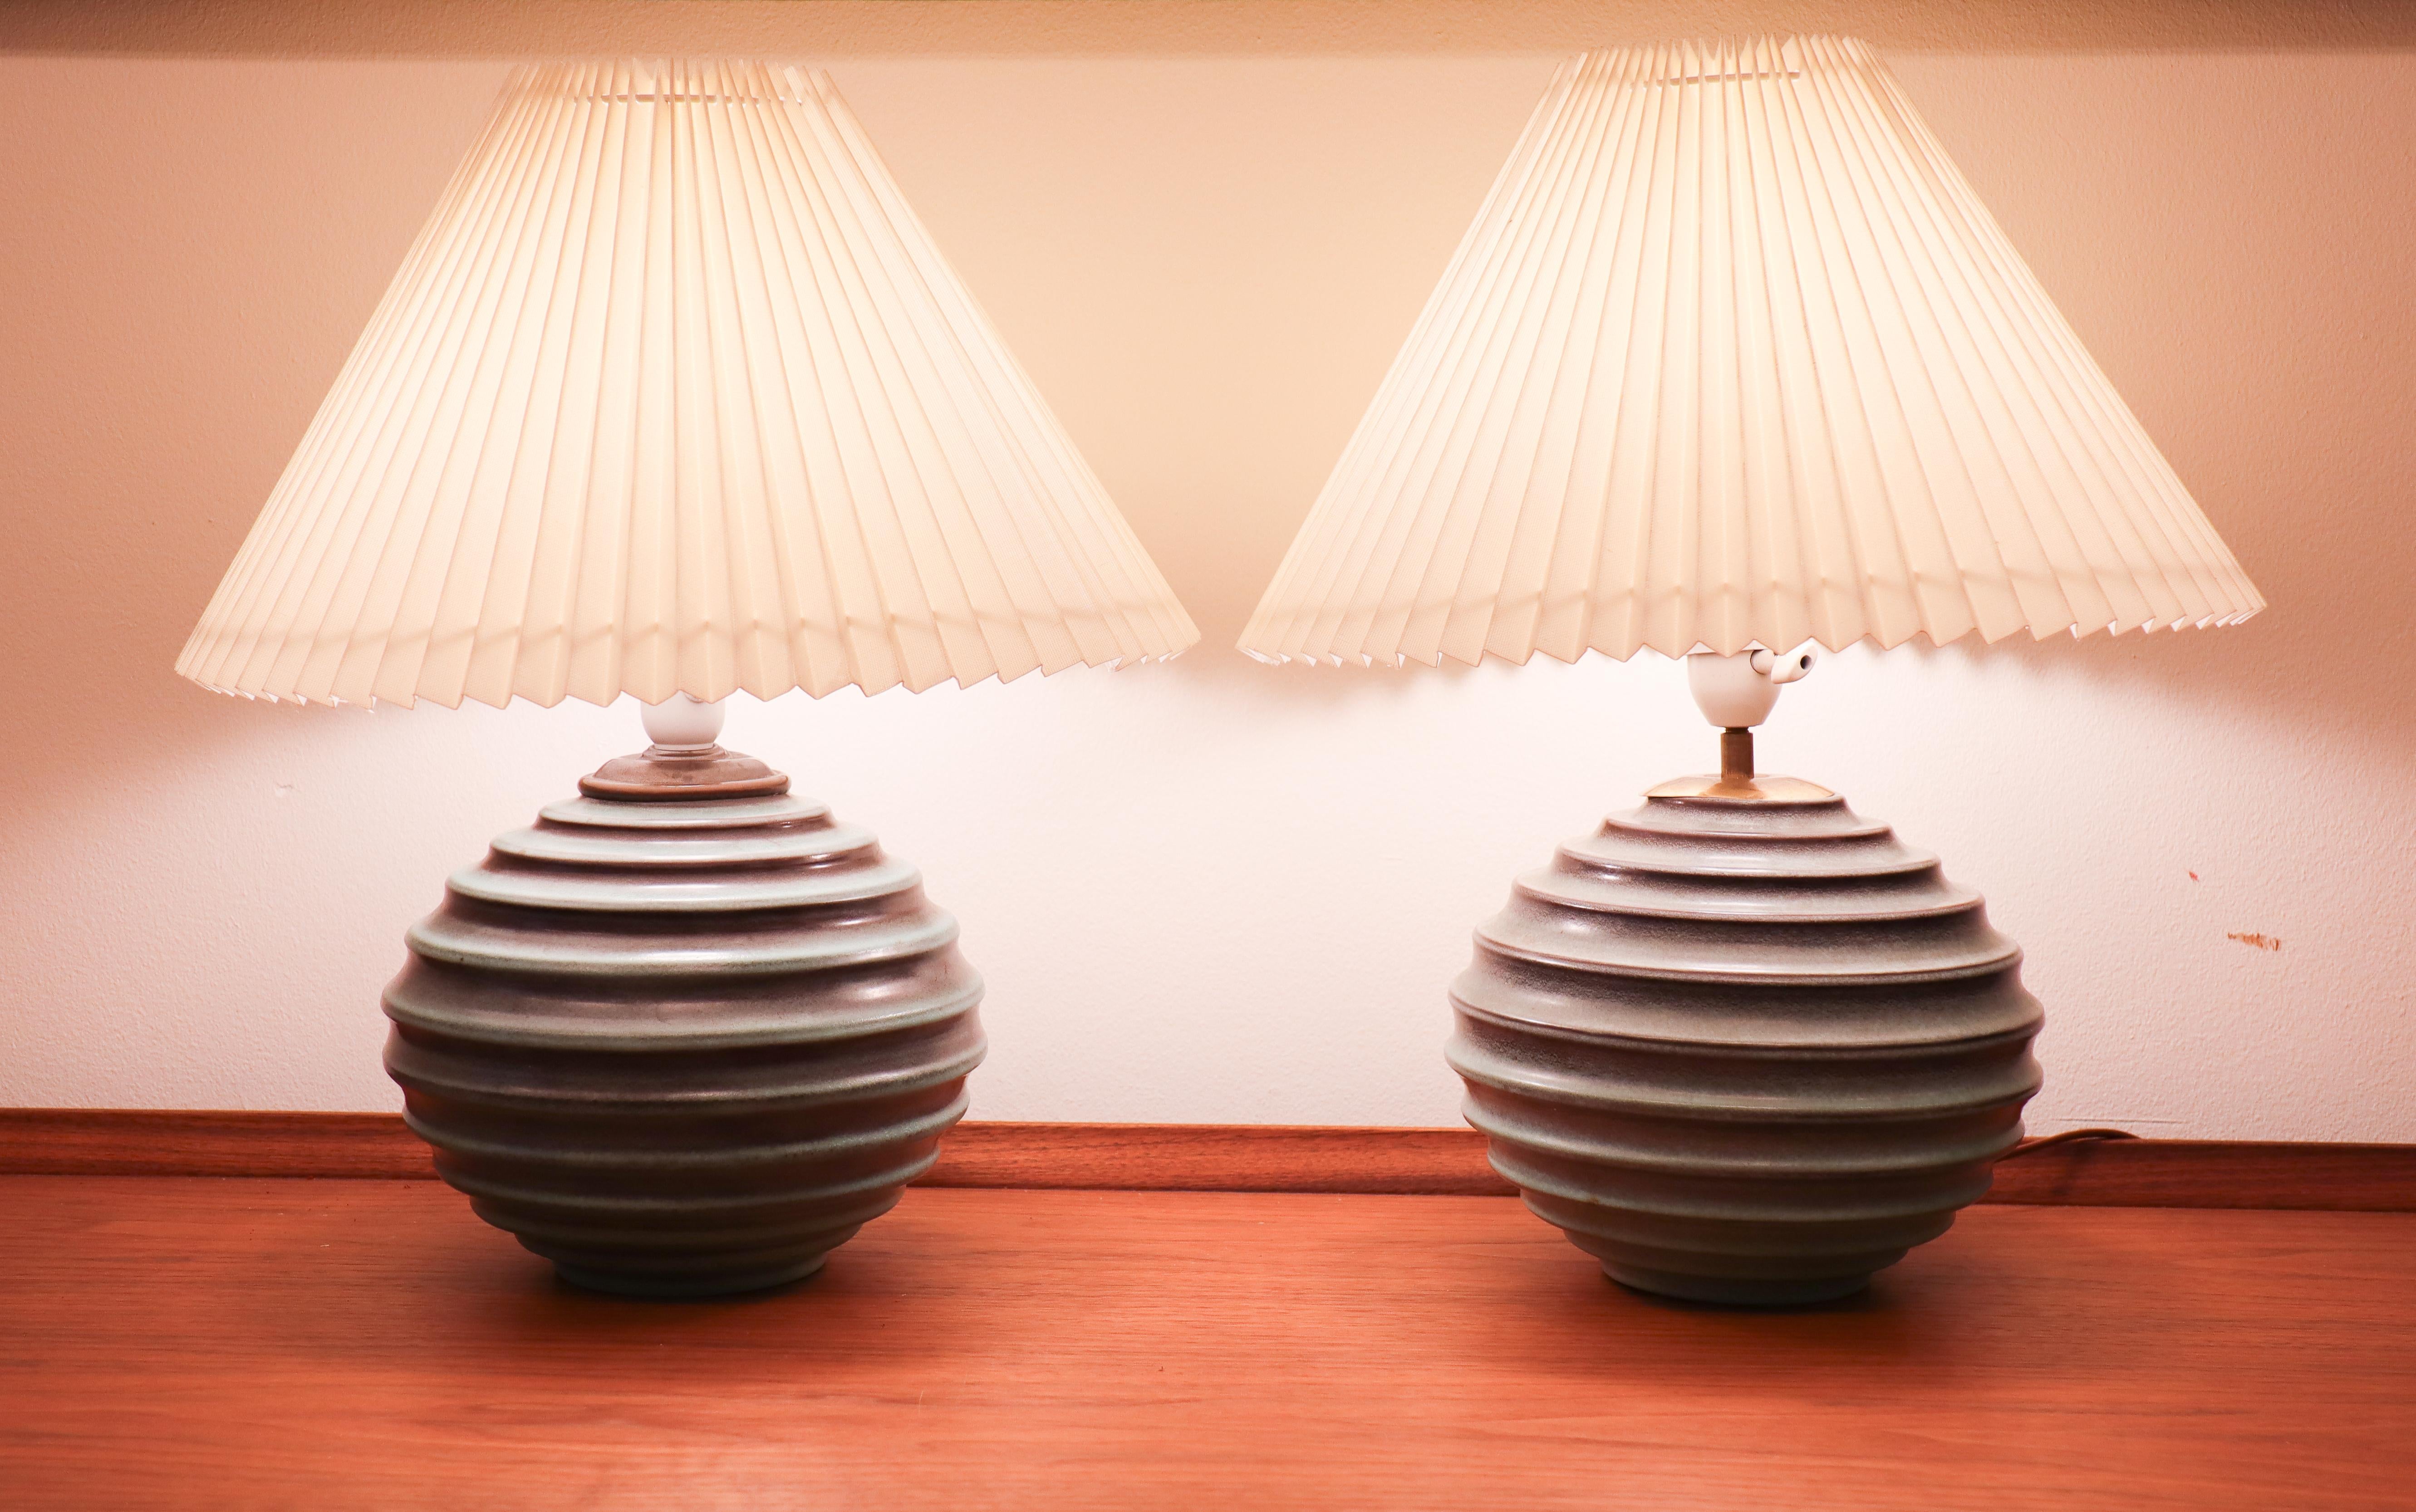 A pair of really nice table lamps, globose shape designed by Ewald Dahlskog at Bo Fajans in Gävle, Sweden in the 1930s. Excluding the lampshades they are 22 cm in diameter and about 28 cm high. Including the lampshades they are 39 cm in diameter and